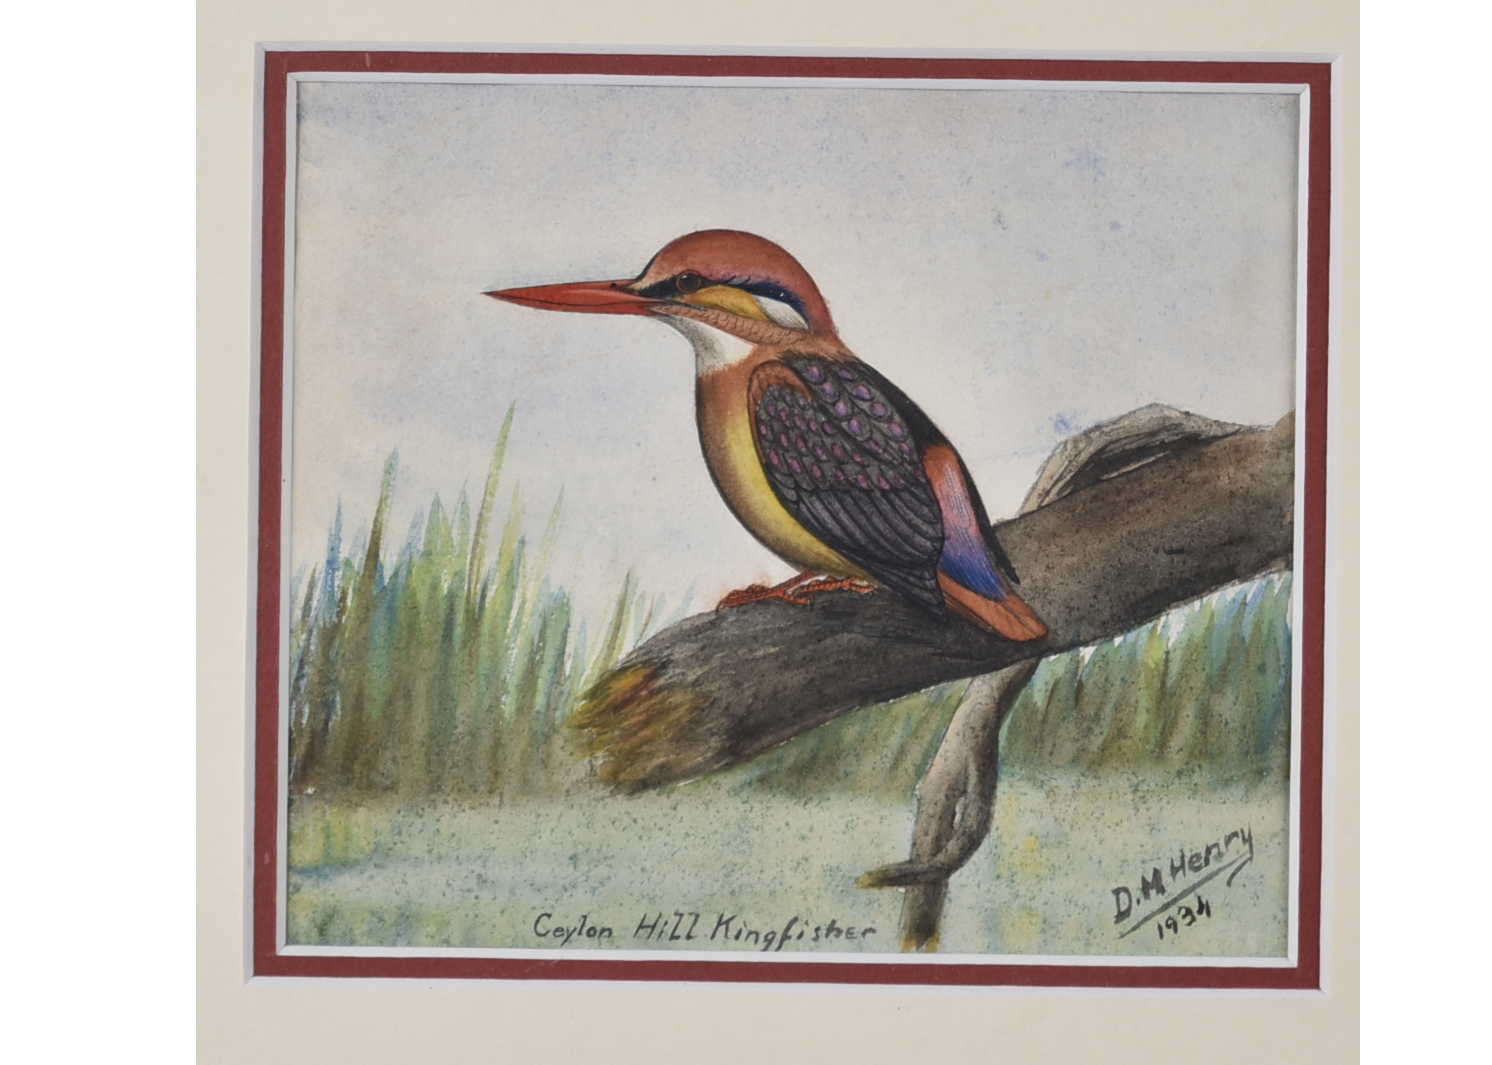 •David Morrison Reid-Henry (1919-1977) watercolour on paper, 'Ceylon Hill Kingfisher', signed and